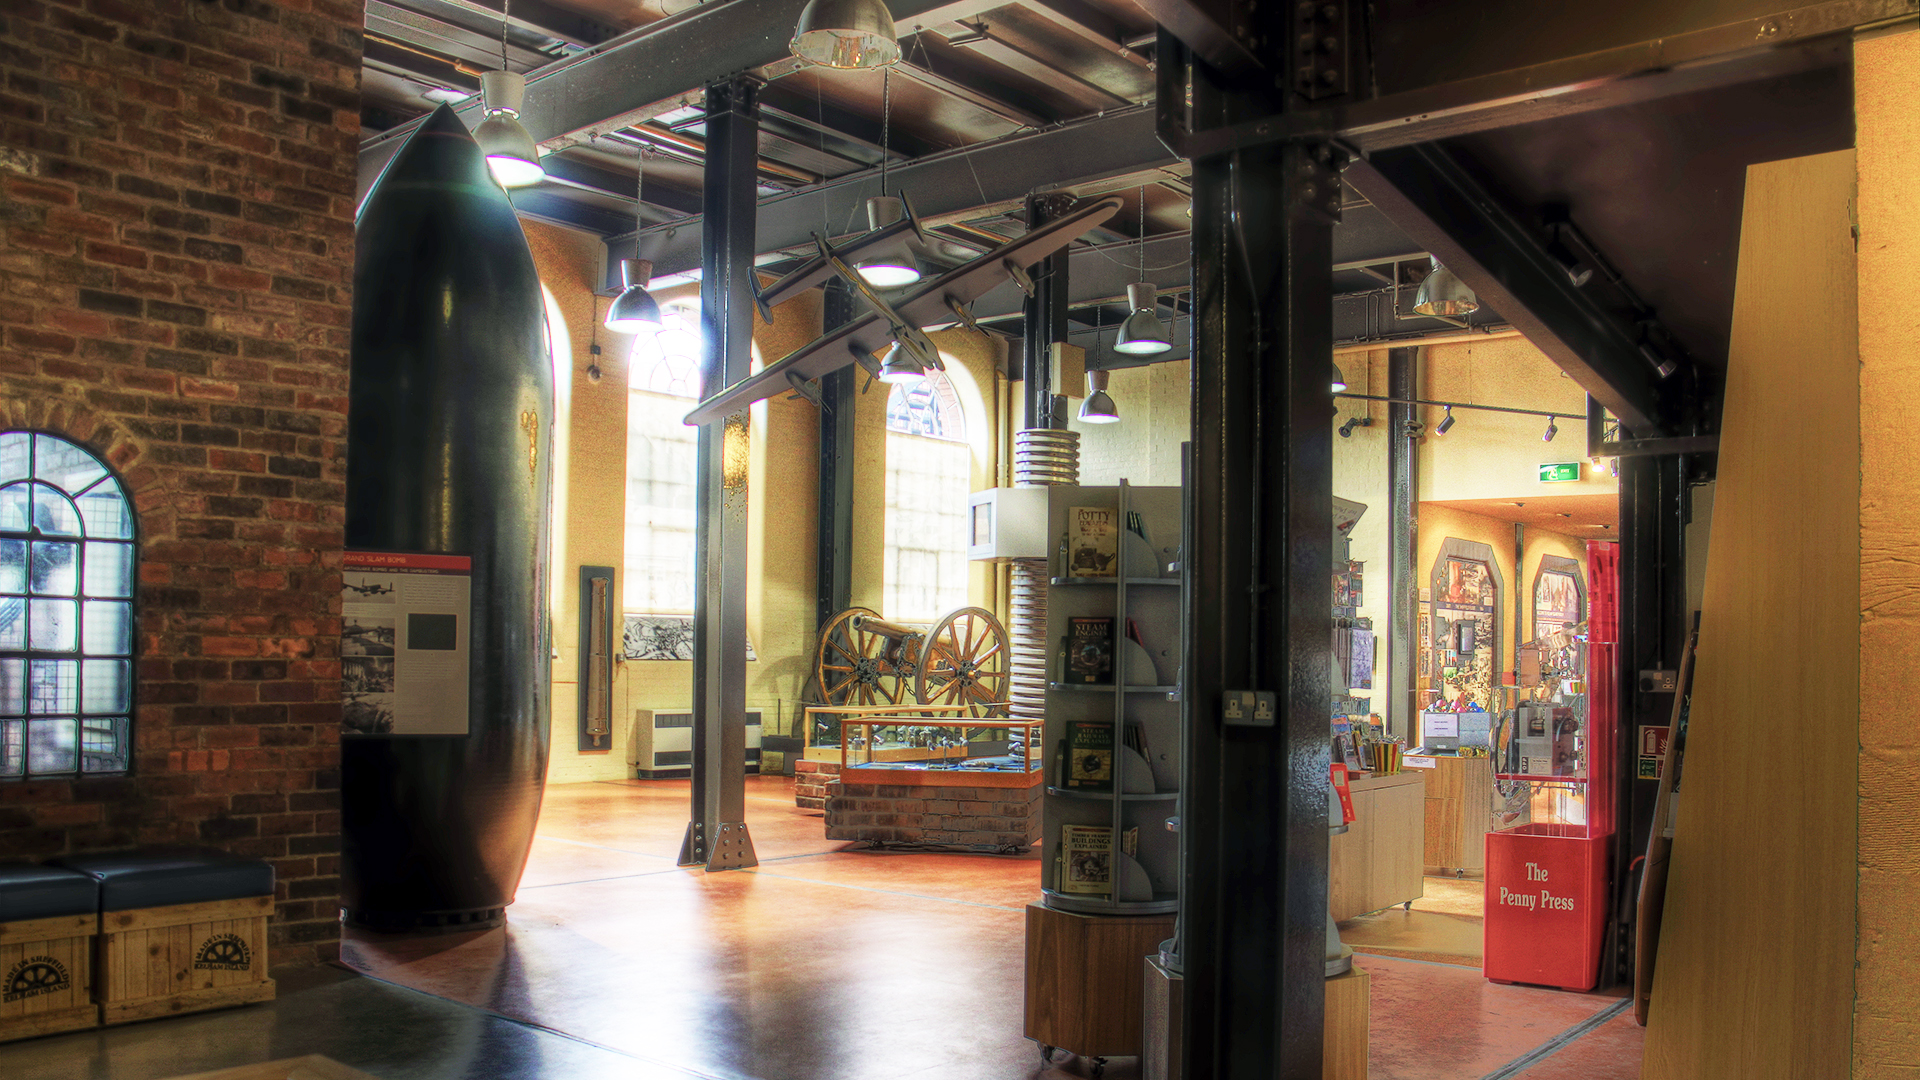 A very large bomb standing vertically on display in the Museum entrance hall.